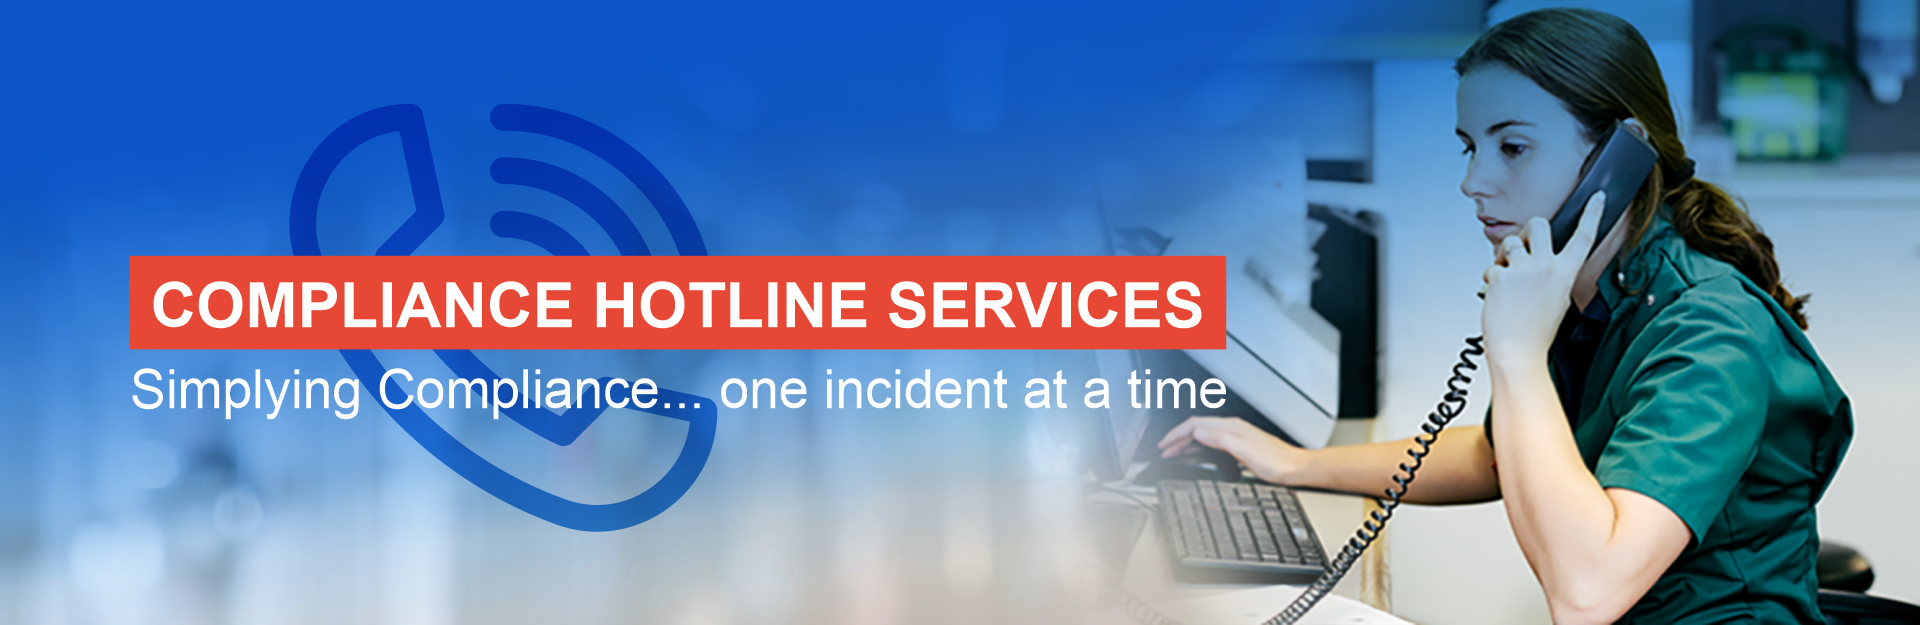 Compliance Hotline provides a comprehensive, inexpensive solution for all of your hotline needs.